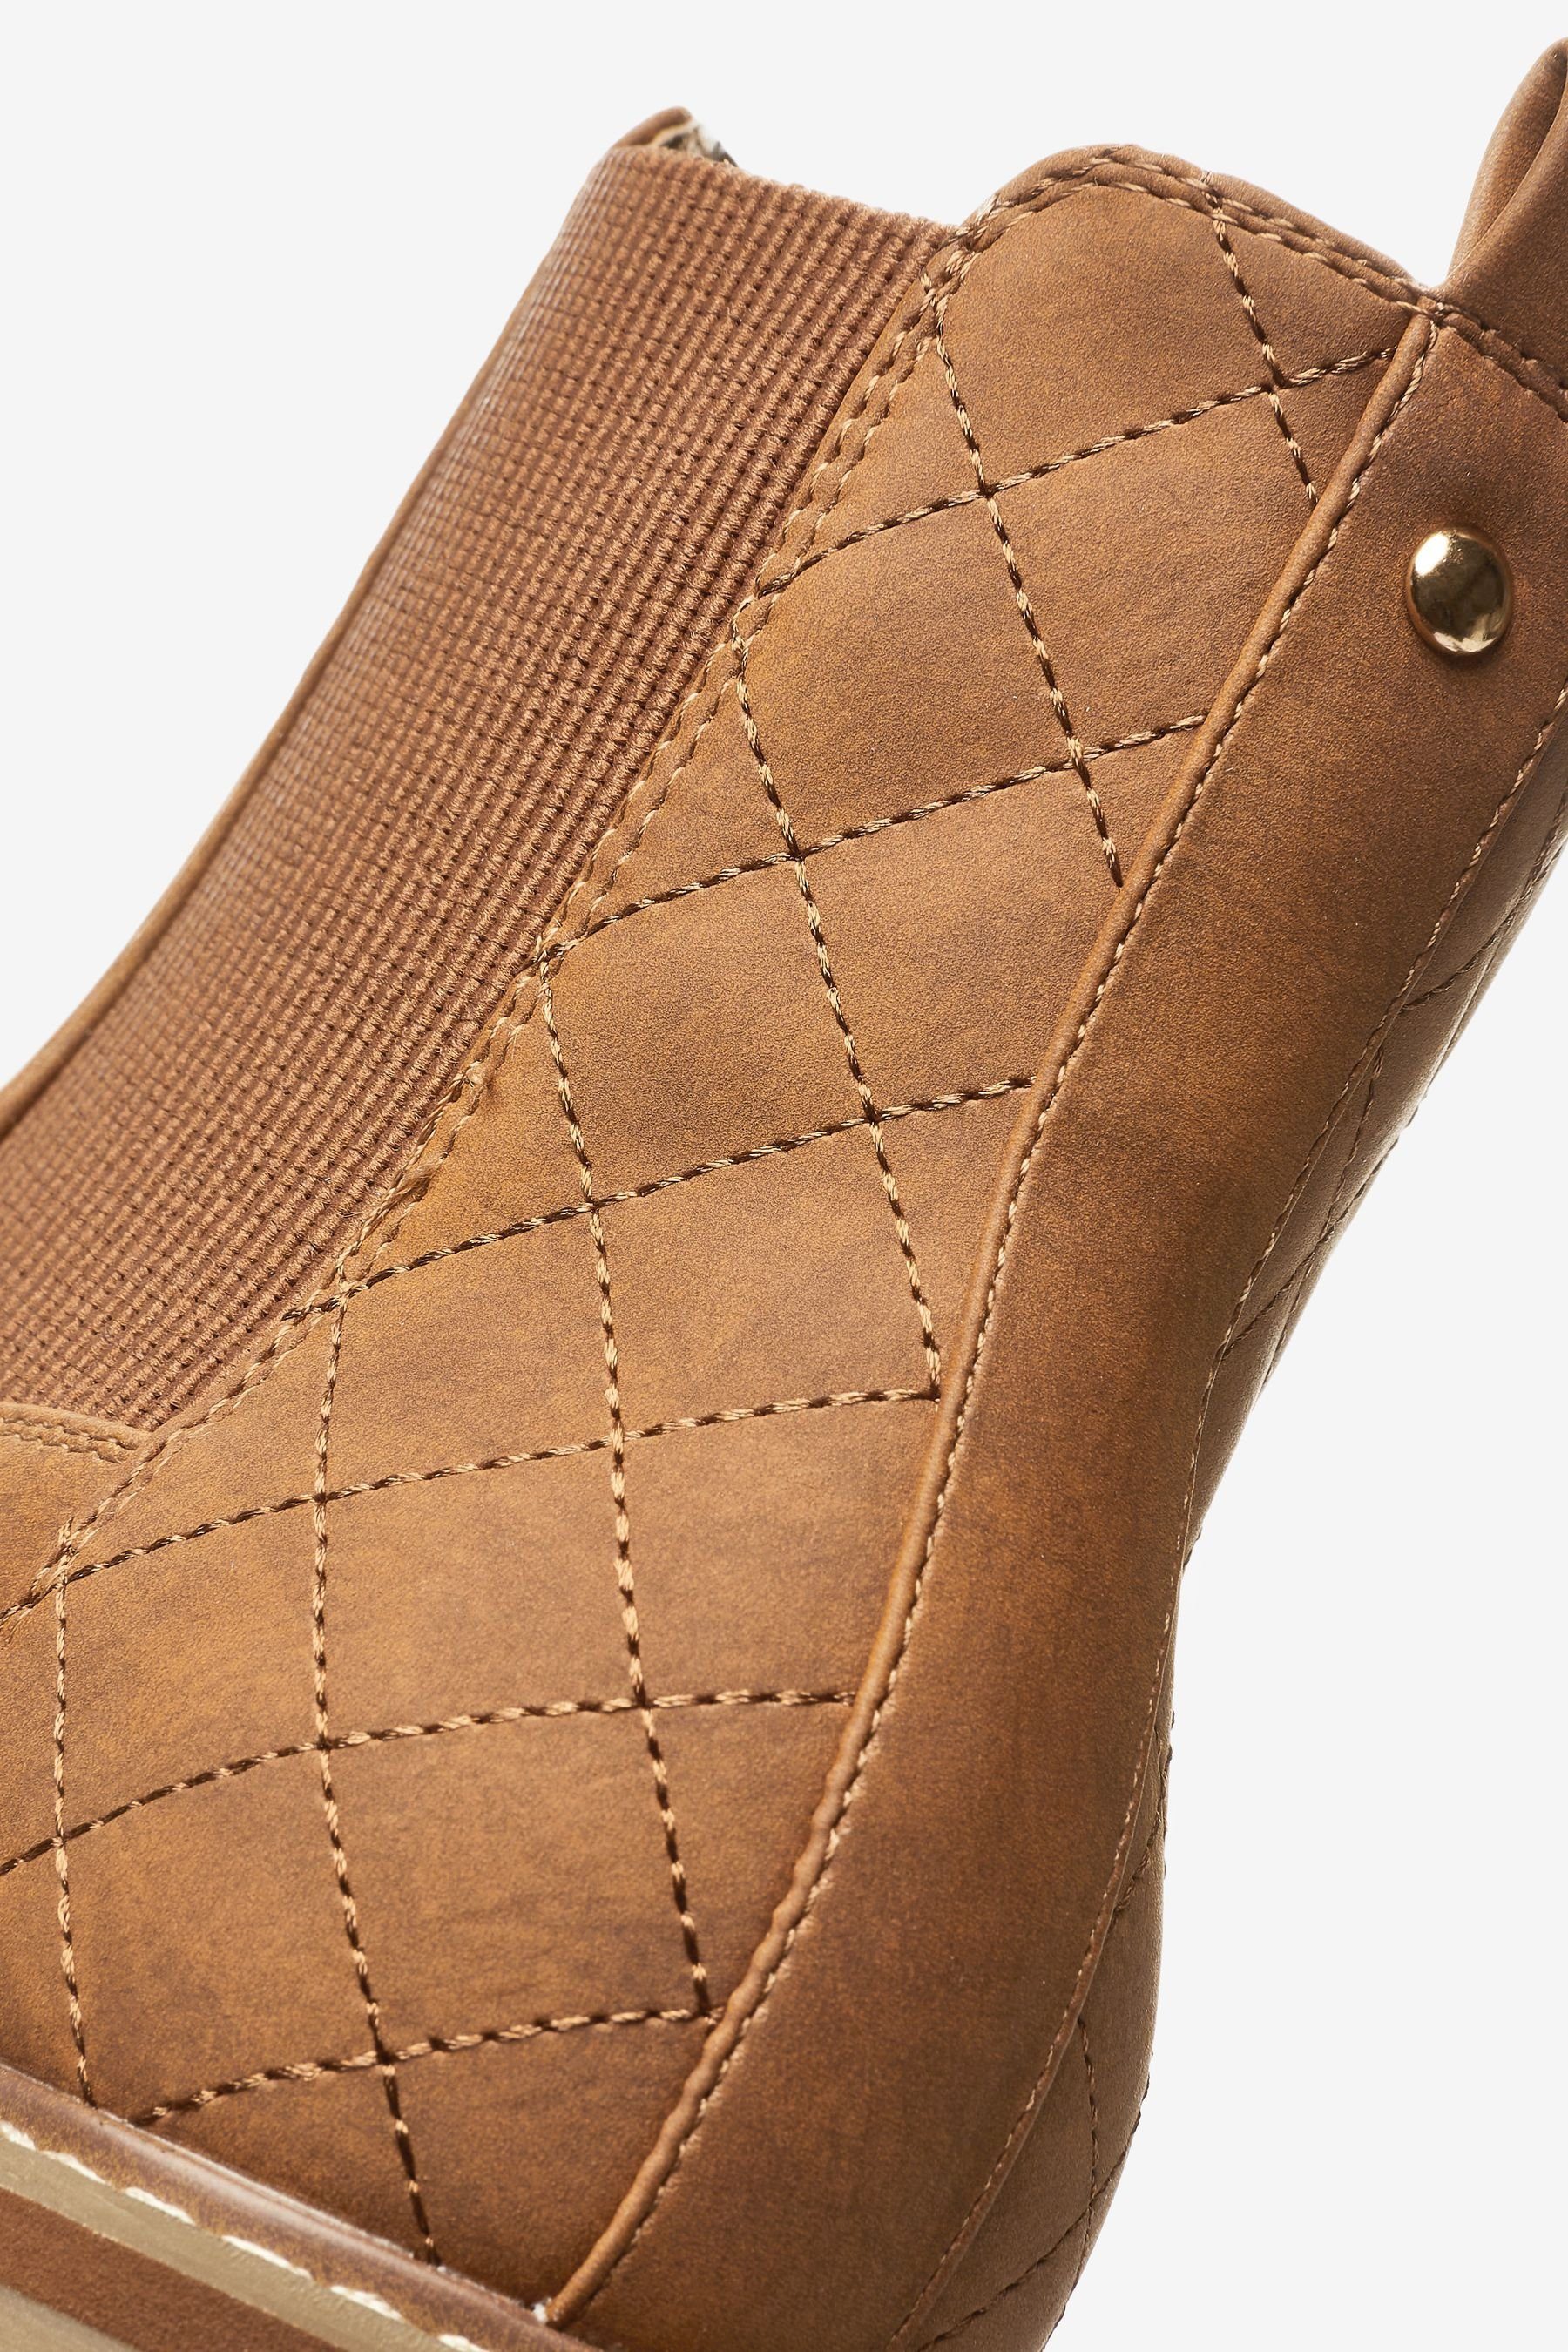 Next Tan Chelseas, Comfort (1-tlg) Forever weite extra Passform Chelseaboots Brown